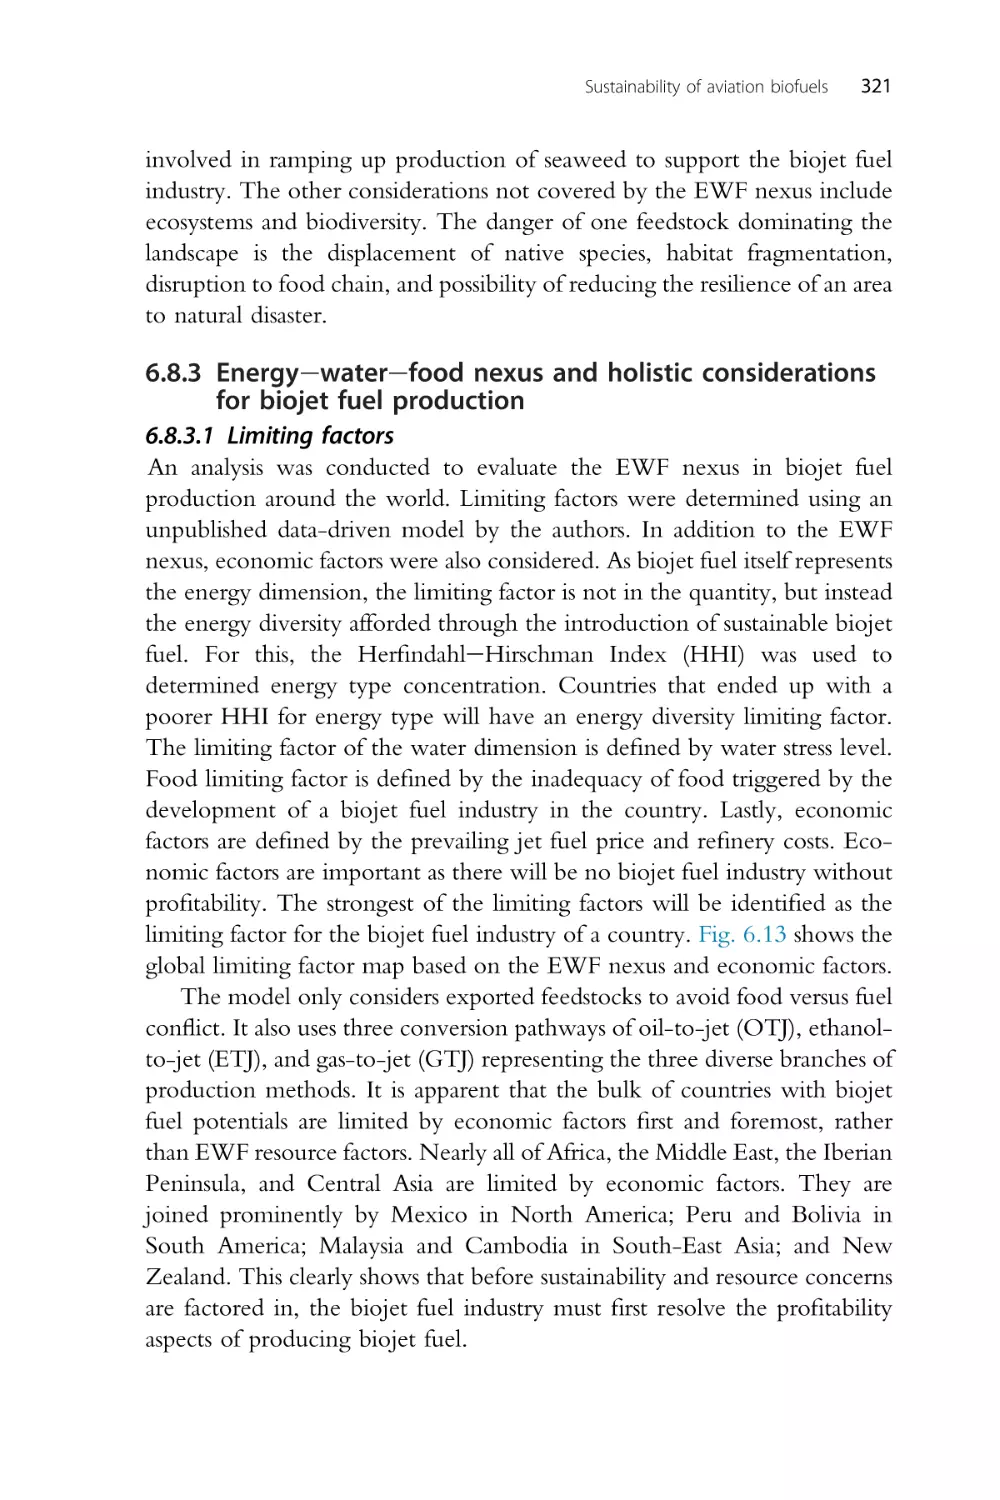 6.8.3 Energy–water–food nexus and holistic considerations for biojet fuel production
6.8.3.1 Limiting factors